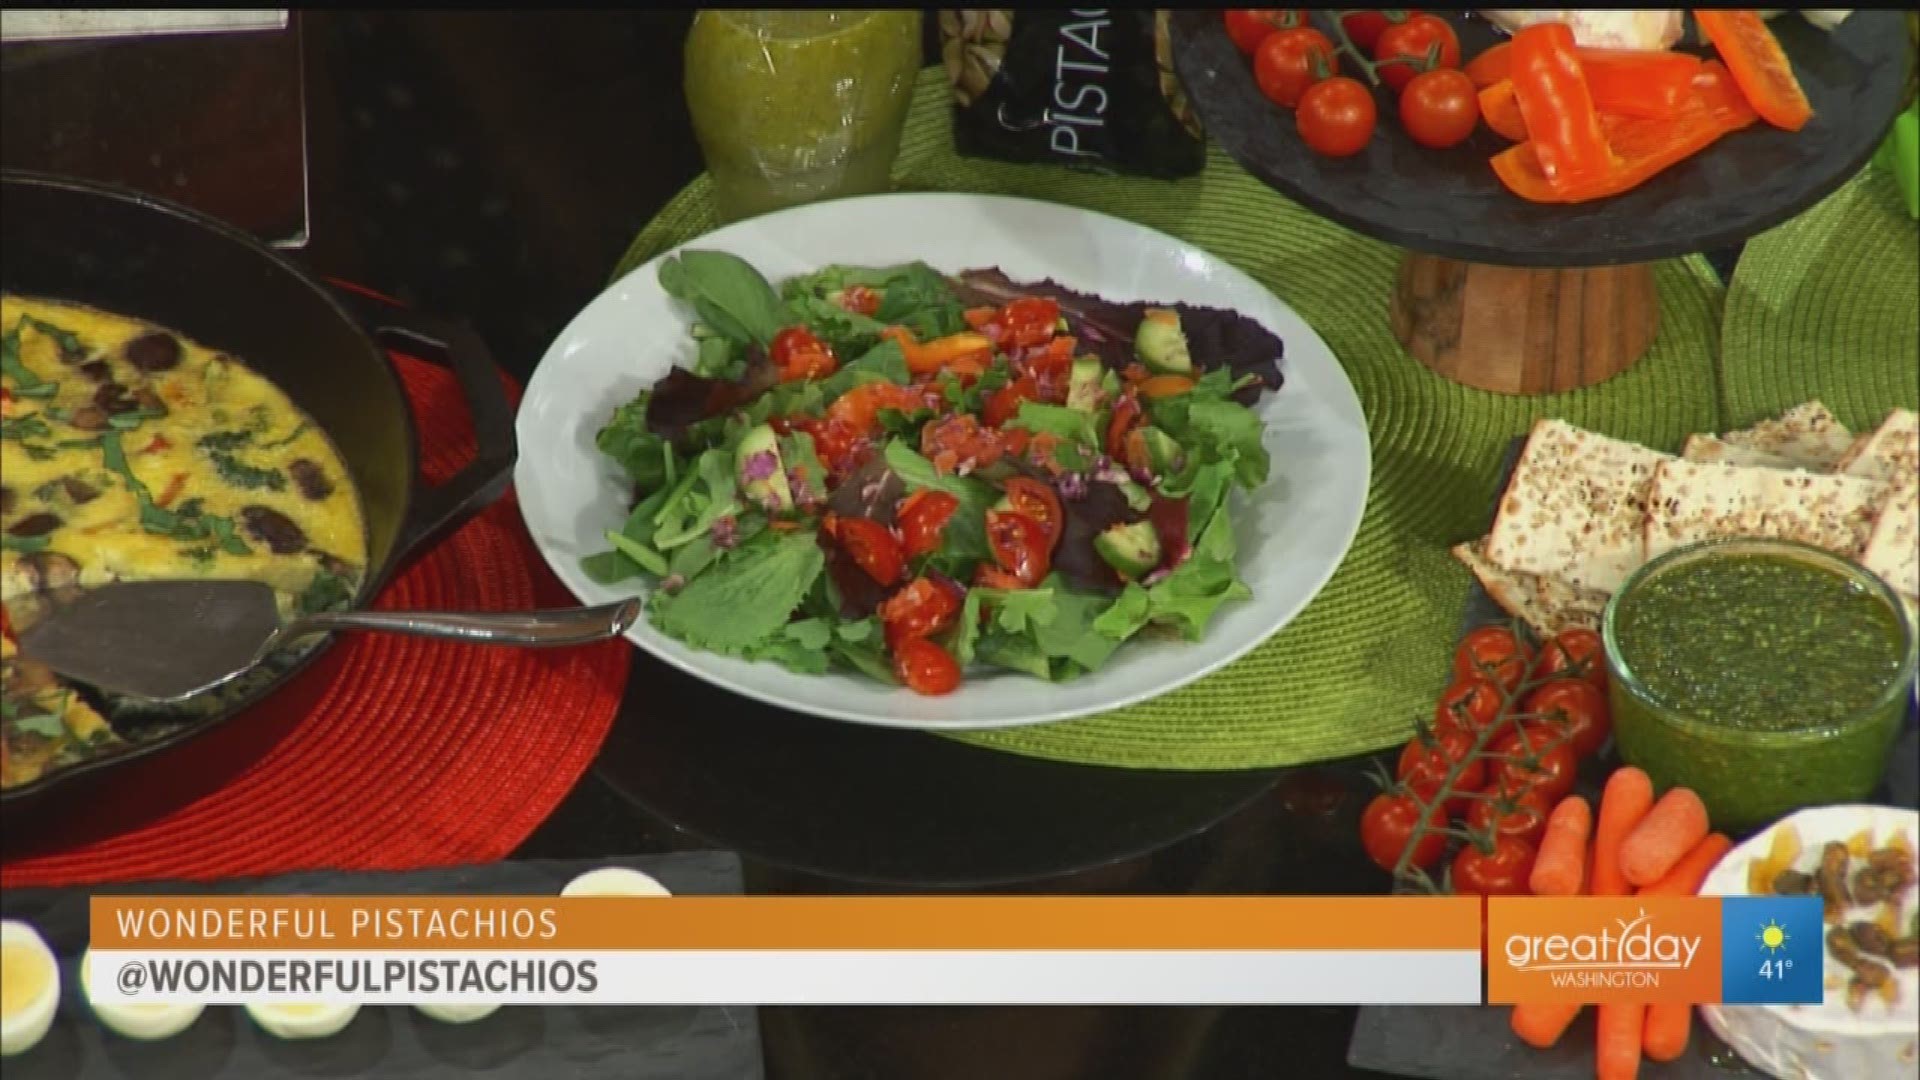 Registered Dietitian and author of Body Kindness shares some healthy brunch ideas for the new year. This segment was sponsored by BodyKindnessBook.com.